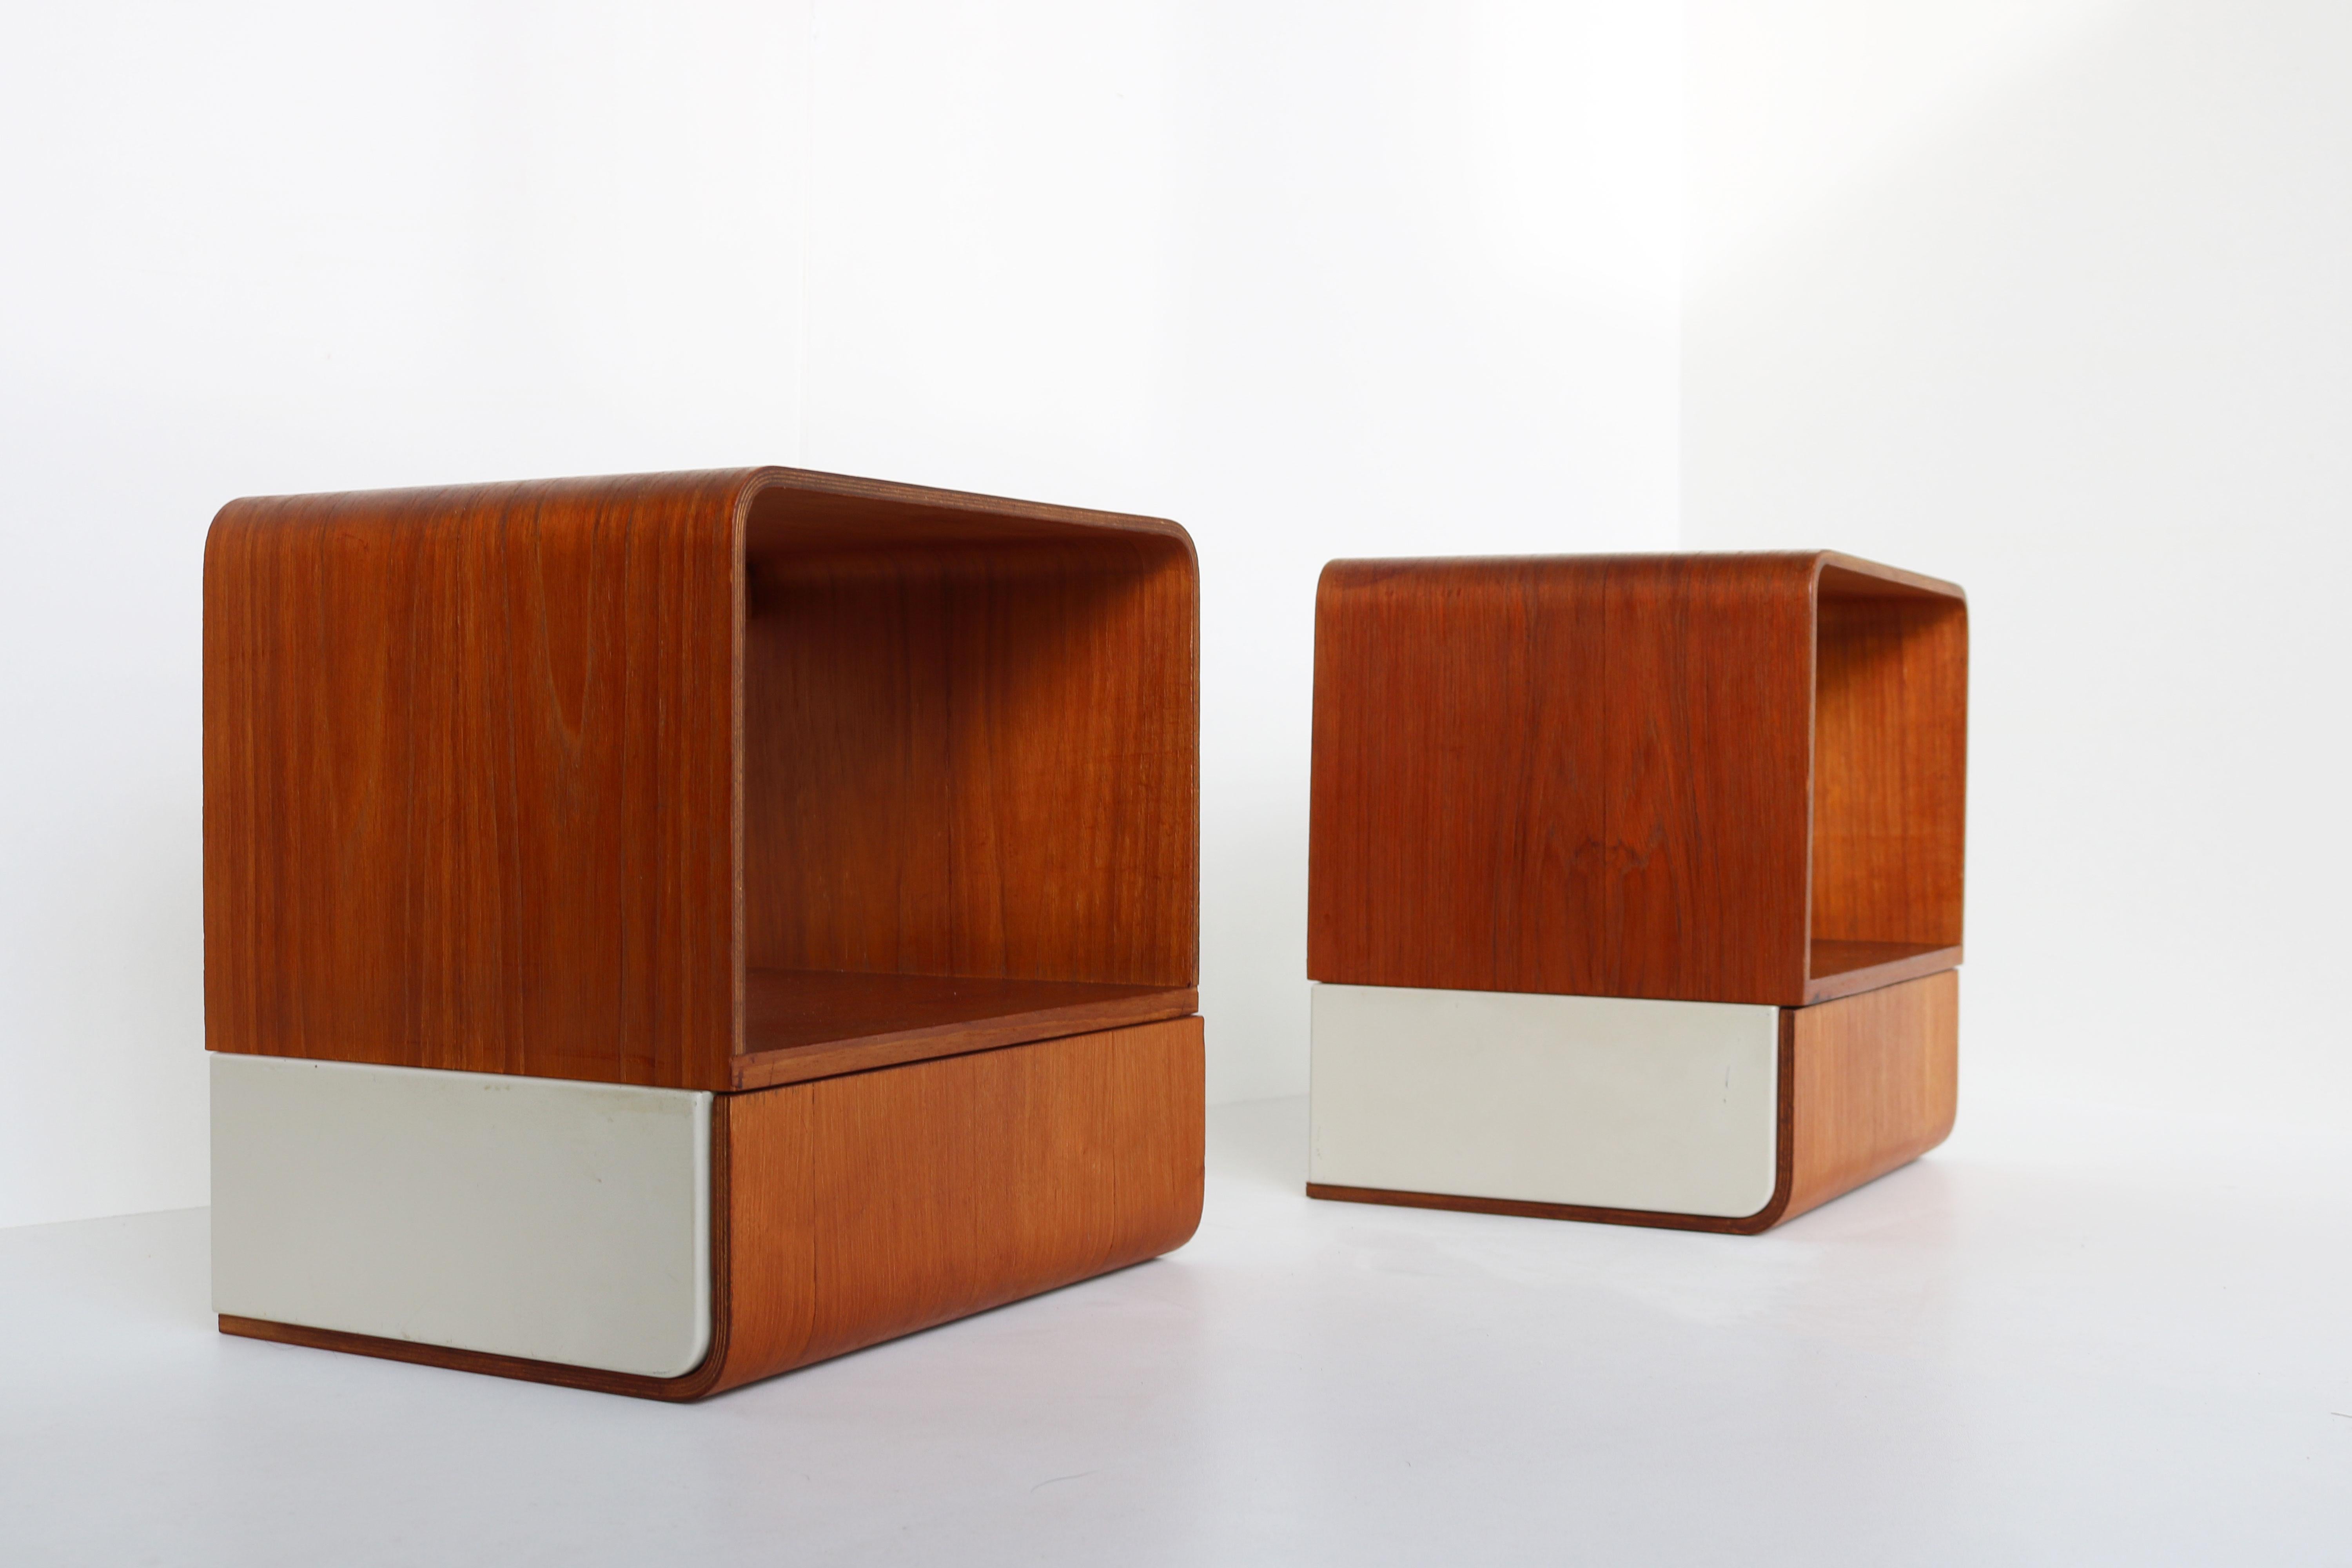 Rare pair of Dutch Design bed cabinets from the ''Euroika Series'' Designed by Friso Kramer for Auping 1963. Wonderful example of Minimalist modernist design with curved teak and white metal. Both cabinets have a drawer and are in great vintage